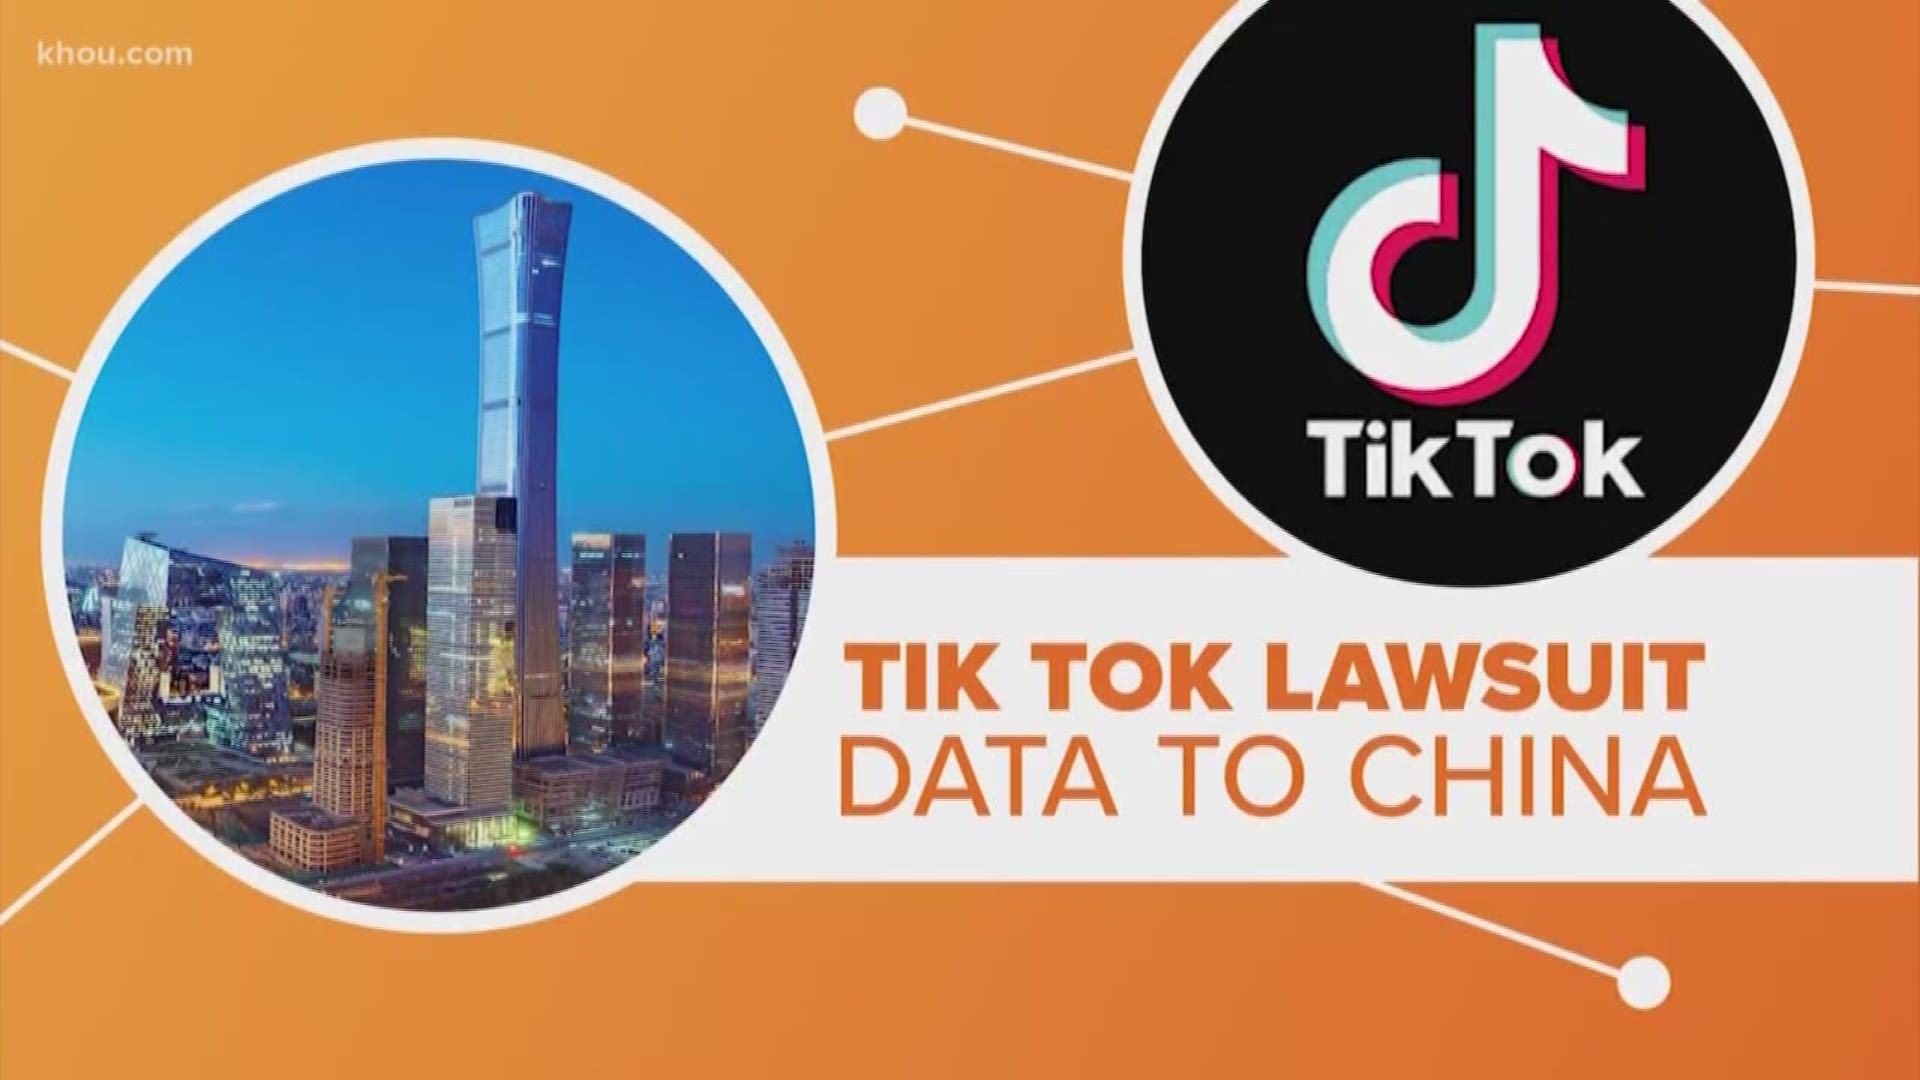 Privacy concerns and a broken promise. Those are the claims in a new lawsuit against the popular social app Tik Tok. Larry Seward connects the dots.